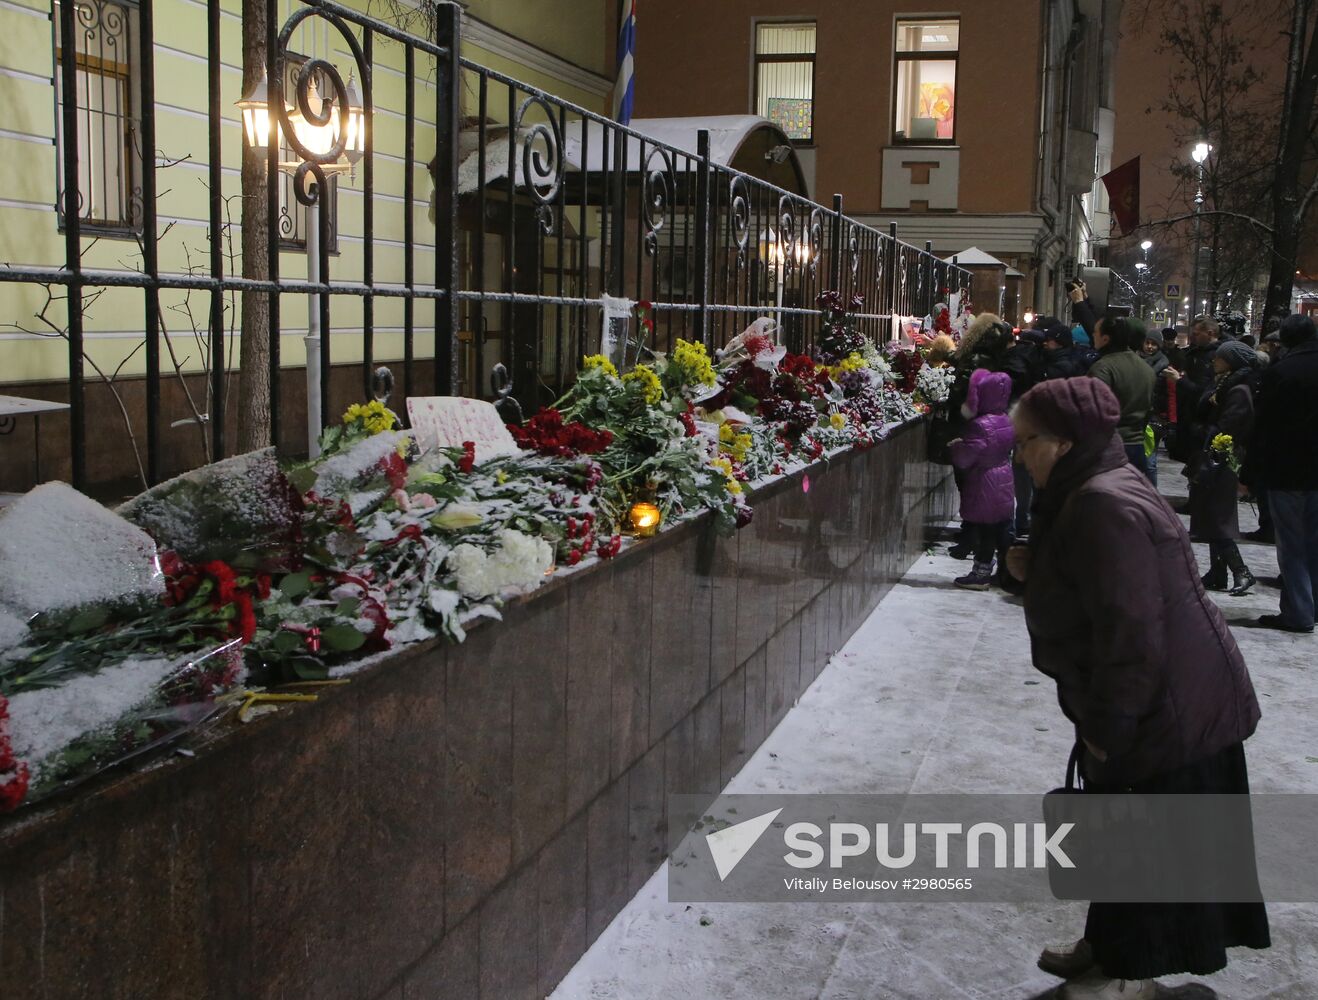 Moscow residents bring flowers to Cuban Embassy in memory of Fidel Castro